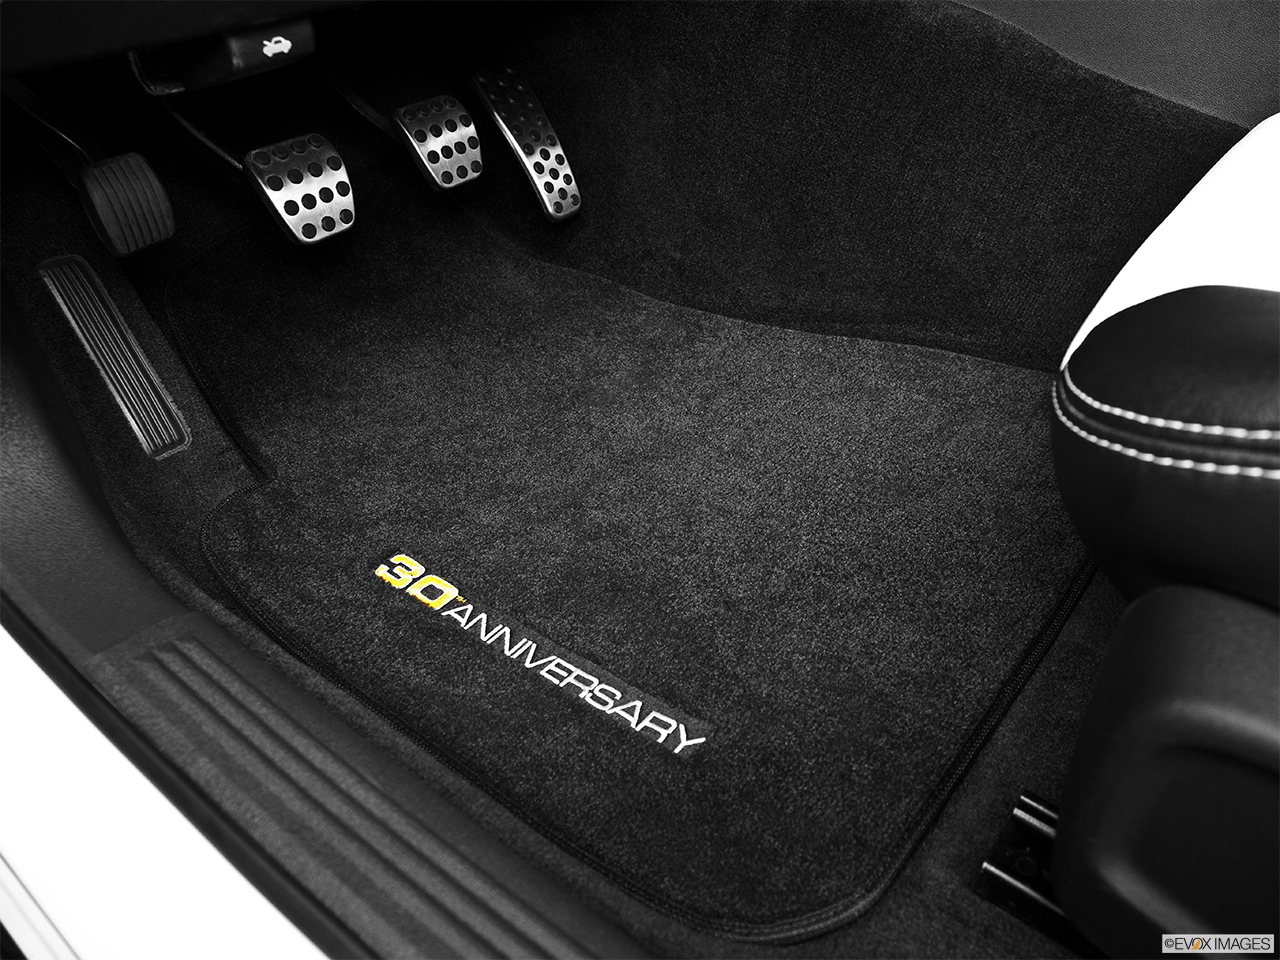 2014 Saleen 570 Challenger Label 570 Black Label Driver's floor mat and pedals. Mid-seat level from outside looking in. 